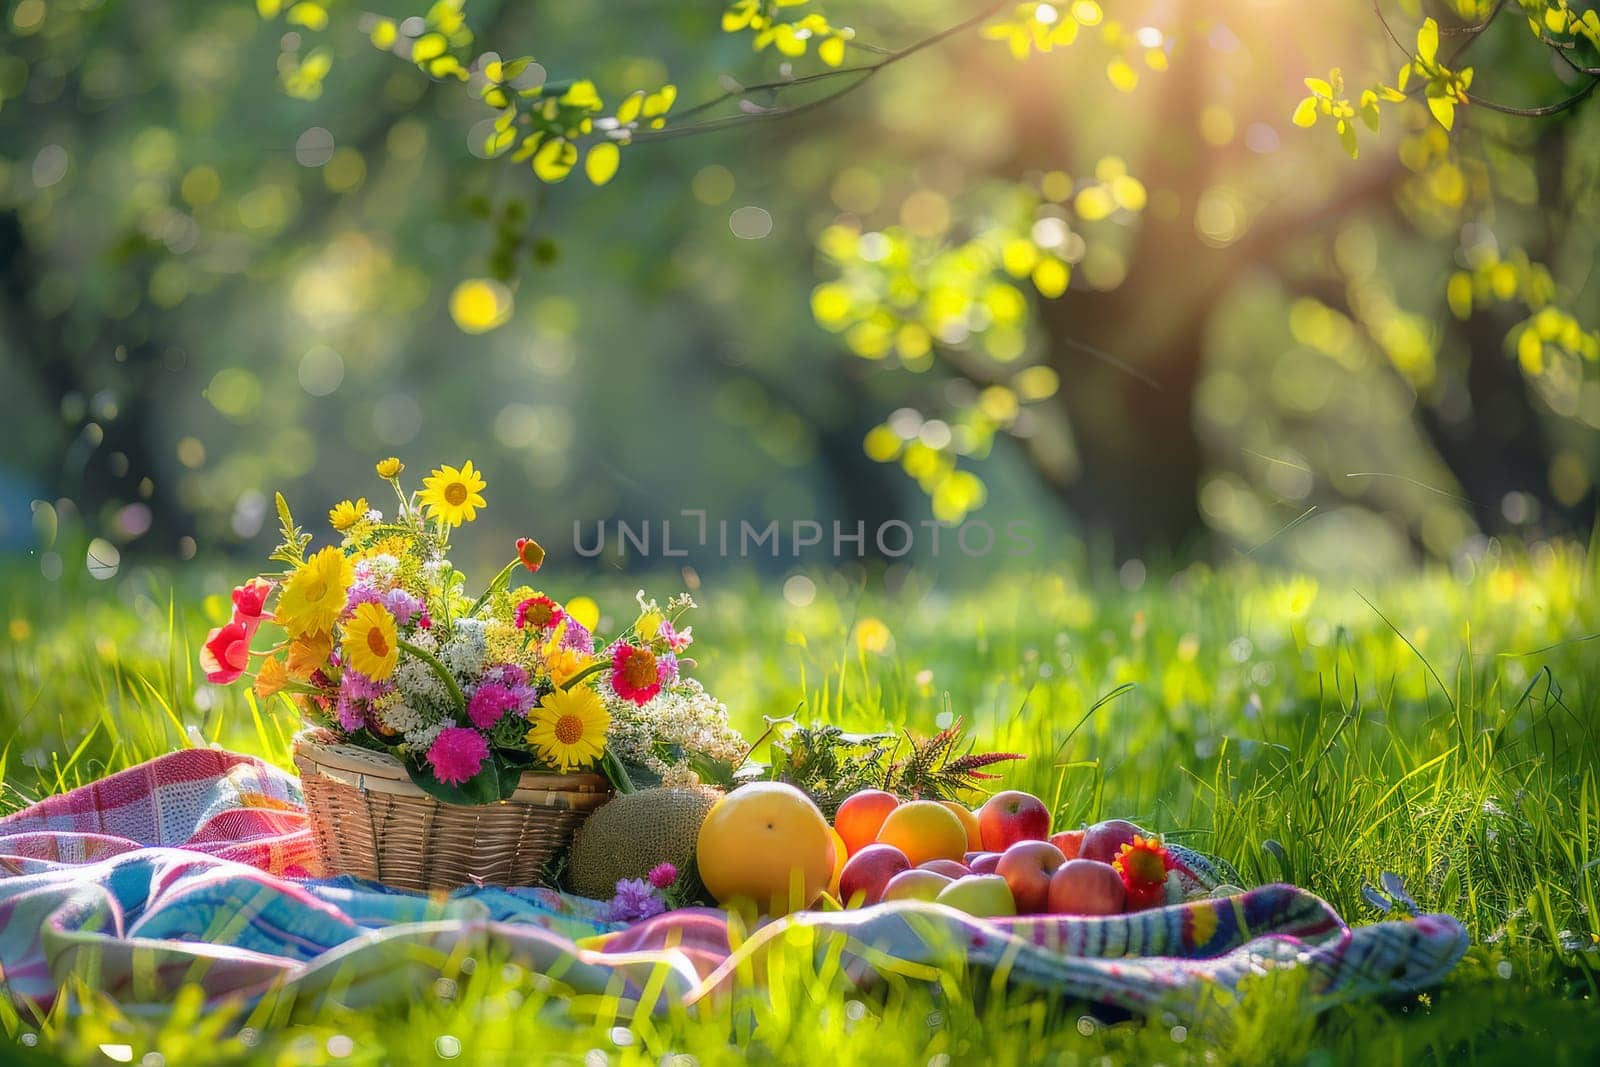 picnic scene with a basket of fruits and flowers surrounded by the greenery park, summer holiday.